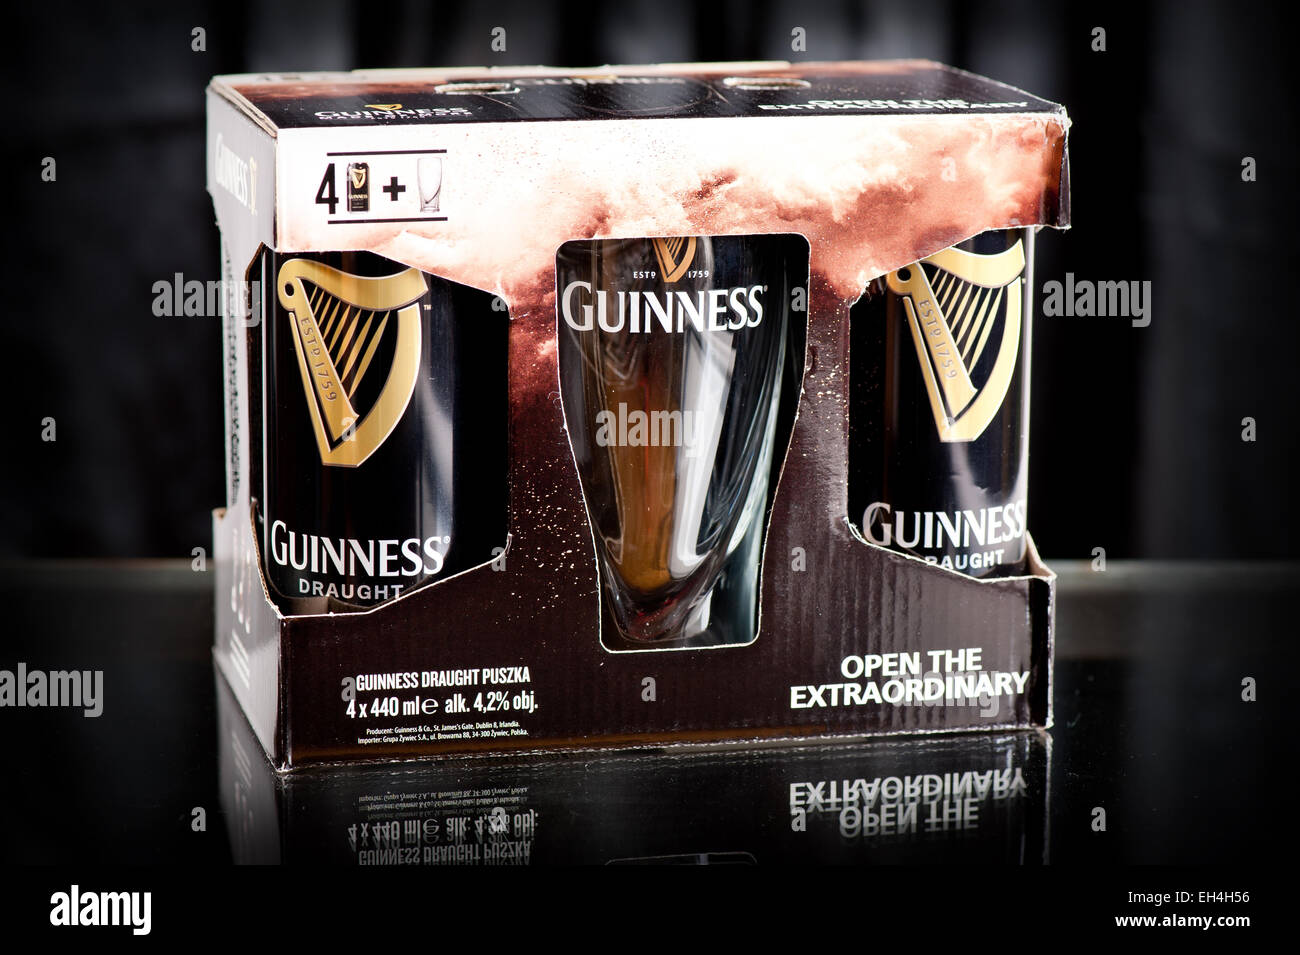 Four pack of Guinness draught beer cans Stock Photo